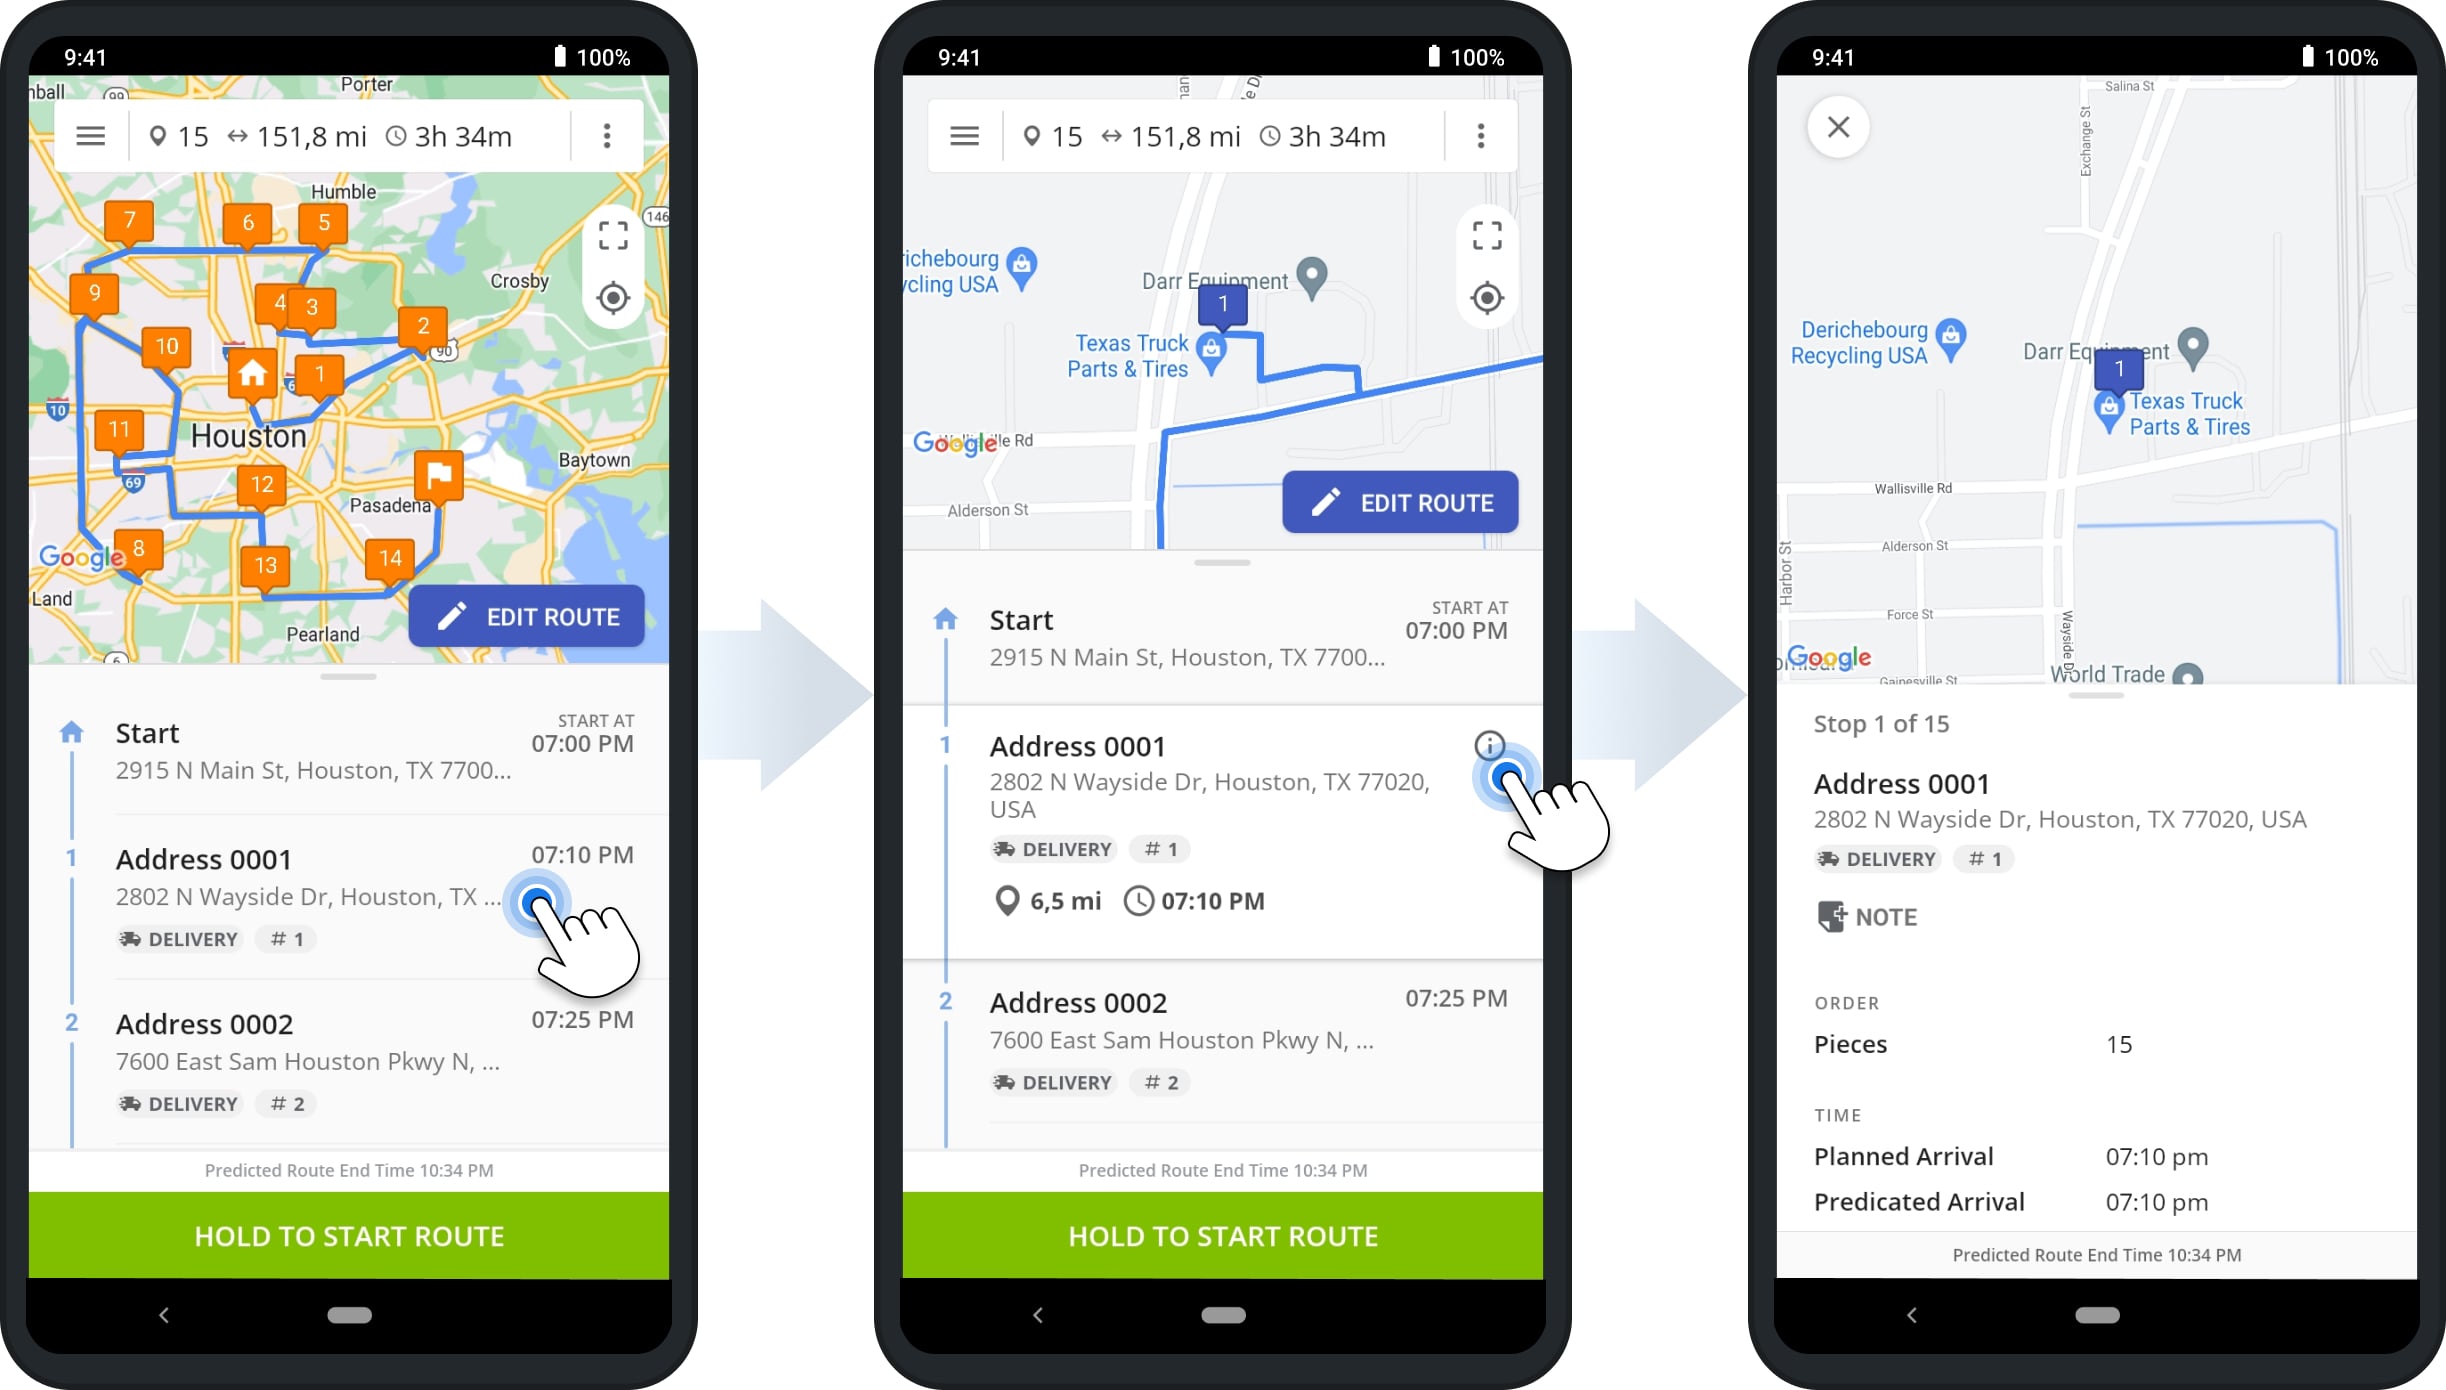 Destination information and constraints such as Pieces can be viewed by drivers on the Route4Me Mobile Route Planner App.